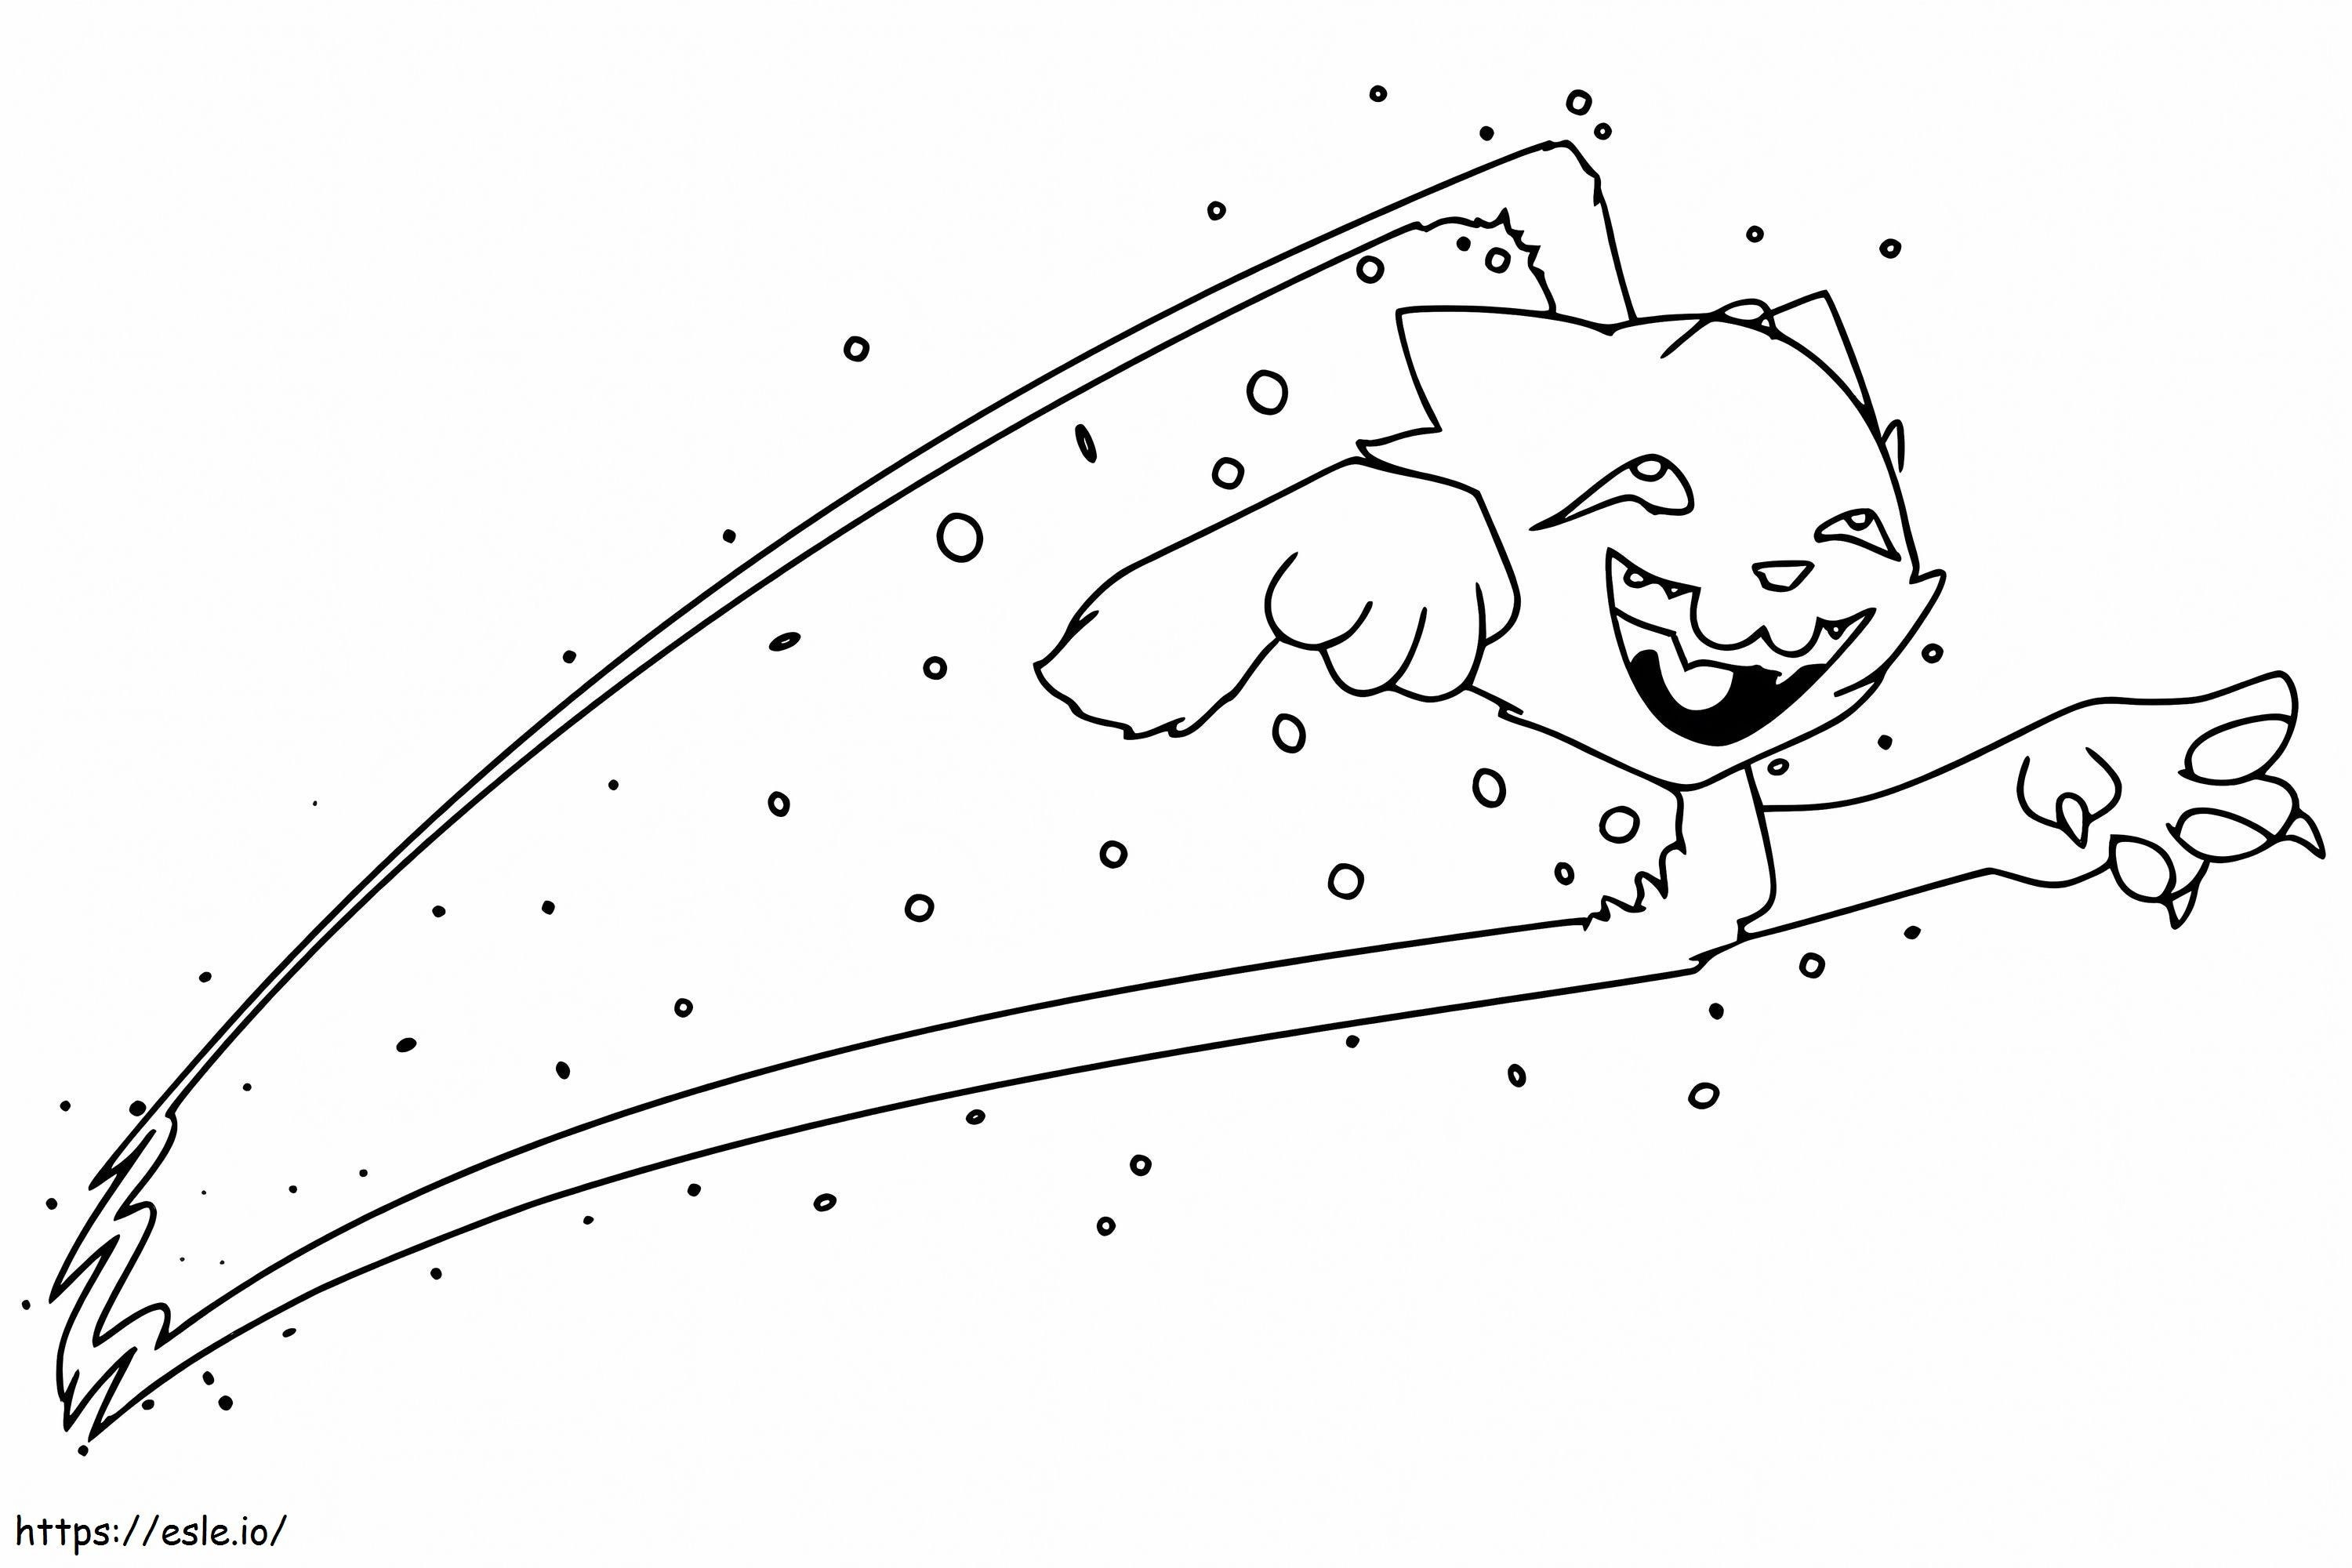 Funny Nyan Cat coloring page